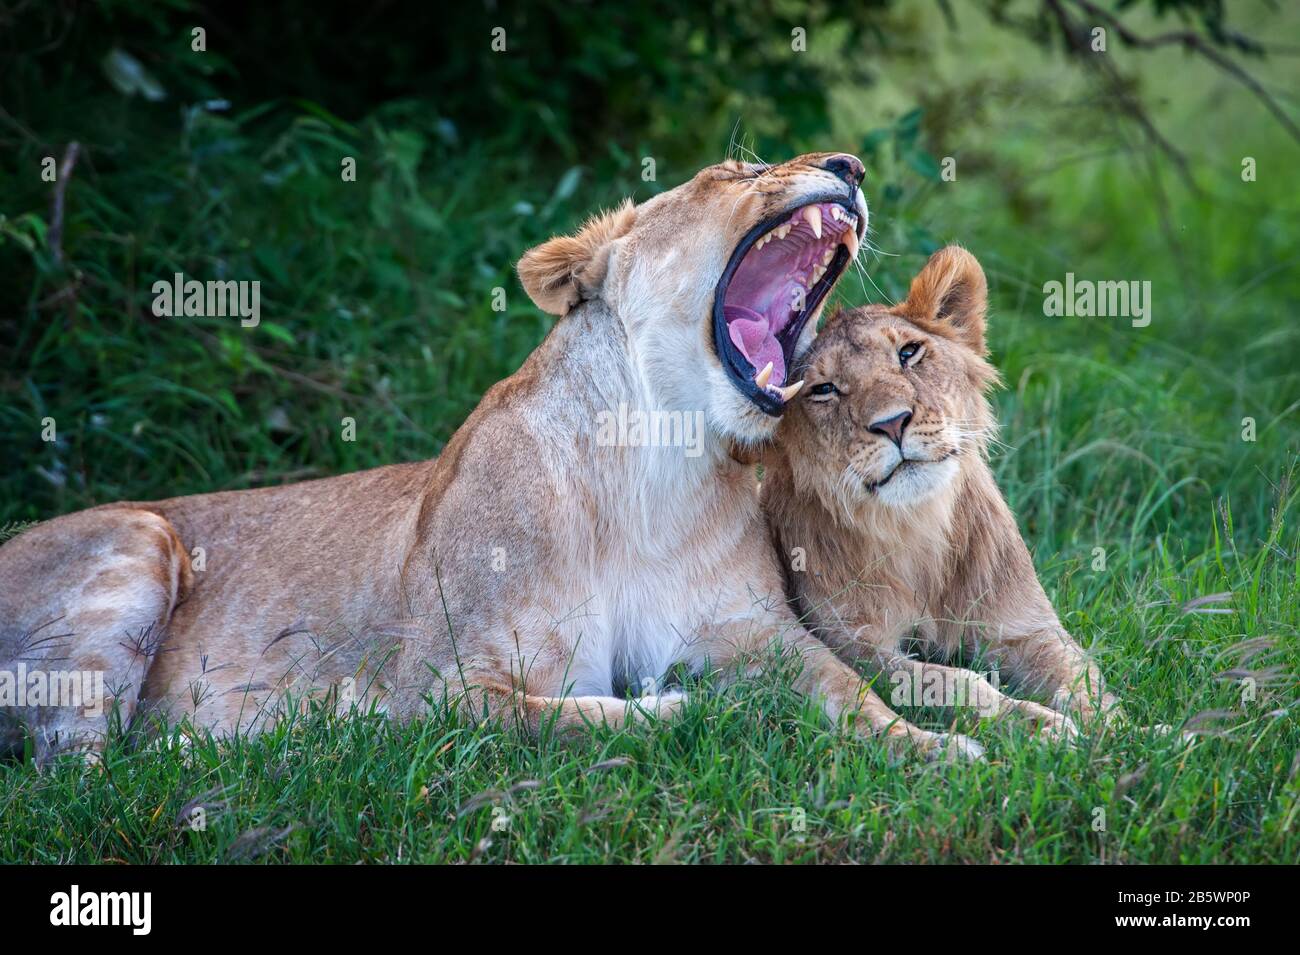 Two Lions in the grass of the National park of Kenya, Africa. Animal in the habitat. Wildlife scene from nature Stock Photo